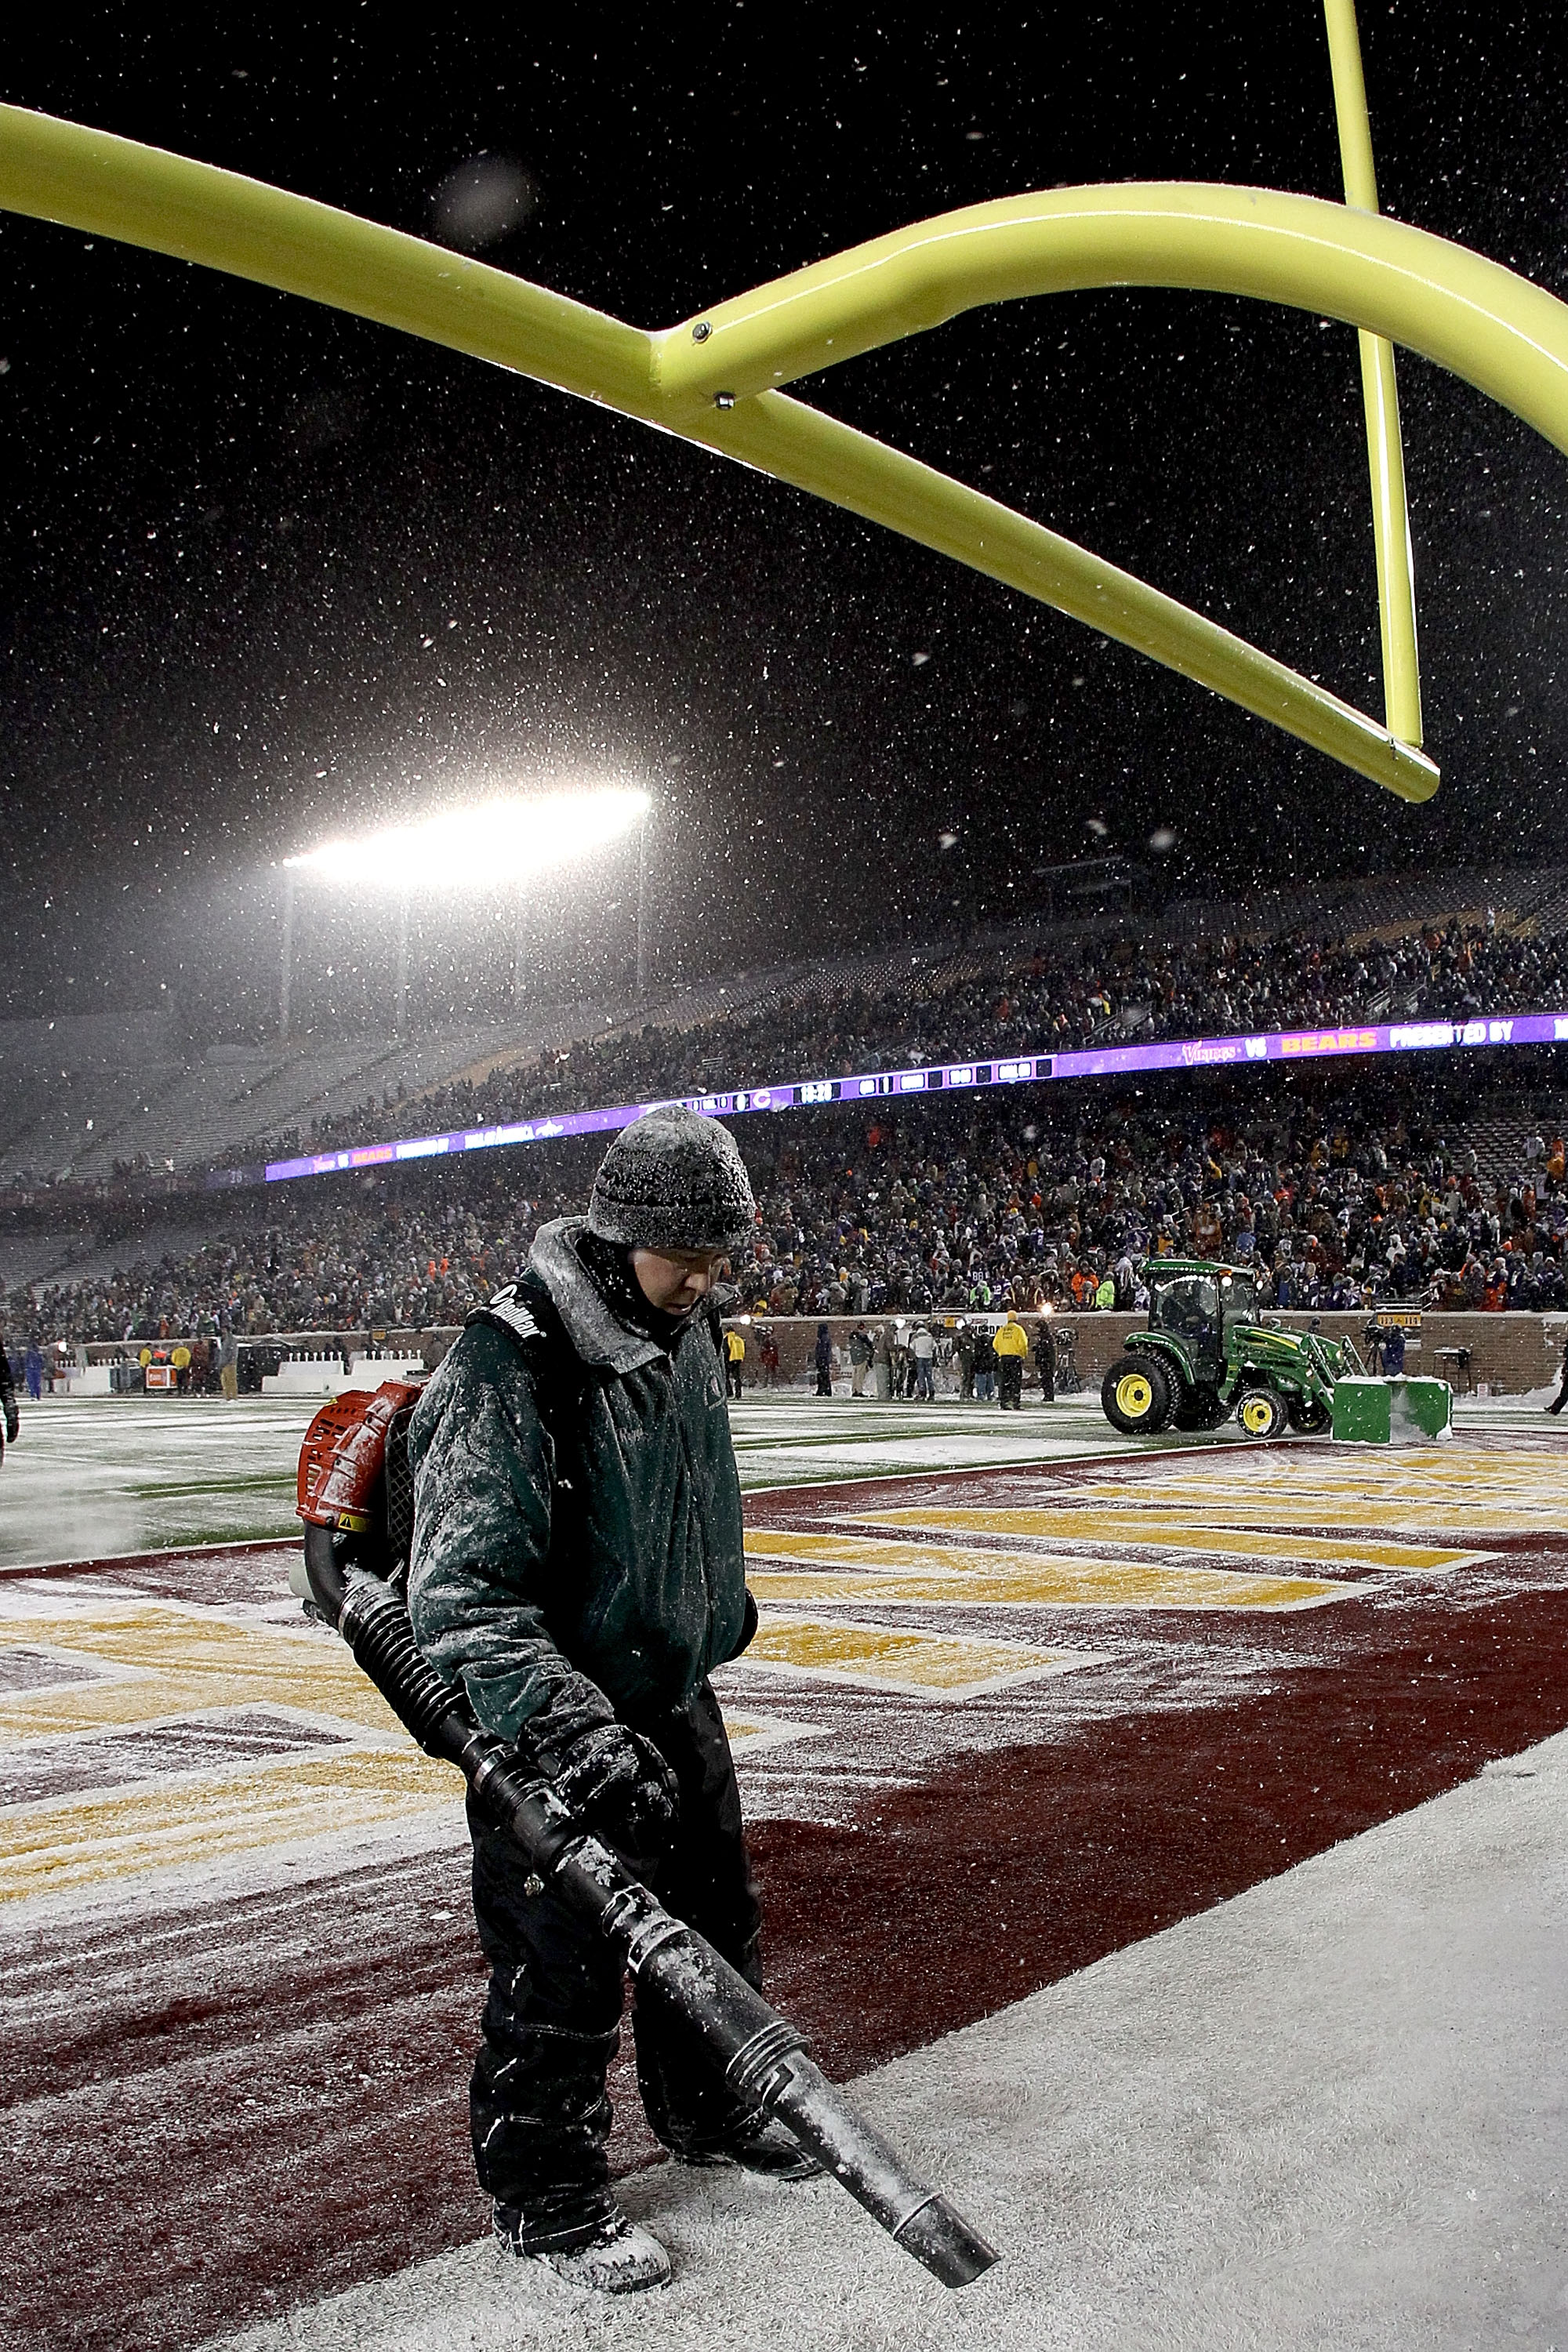 MINNEAPOLIS, MN - DECEMBER 20:  Workers clear snow from the field before Minnesota Vikings play the Chicago Bears at TCF Bank Stadium on December 20, 2010 in Minneapolis, Minnesota.  (Photo by Matthew Stockman/Getty Images)